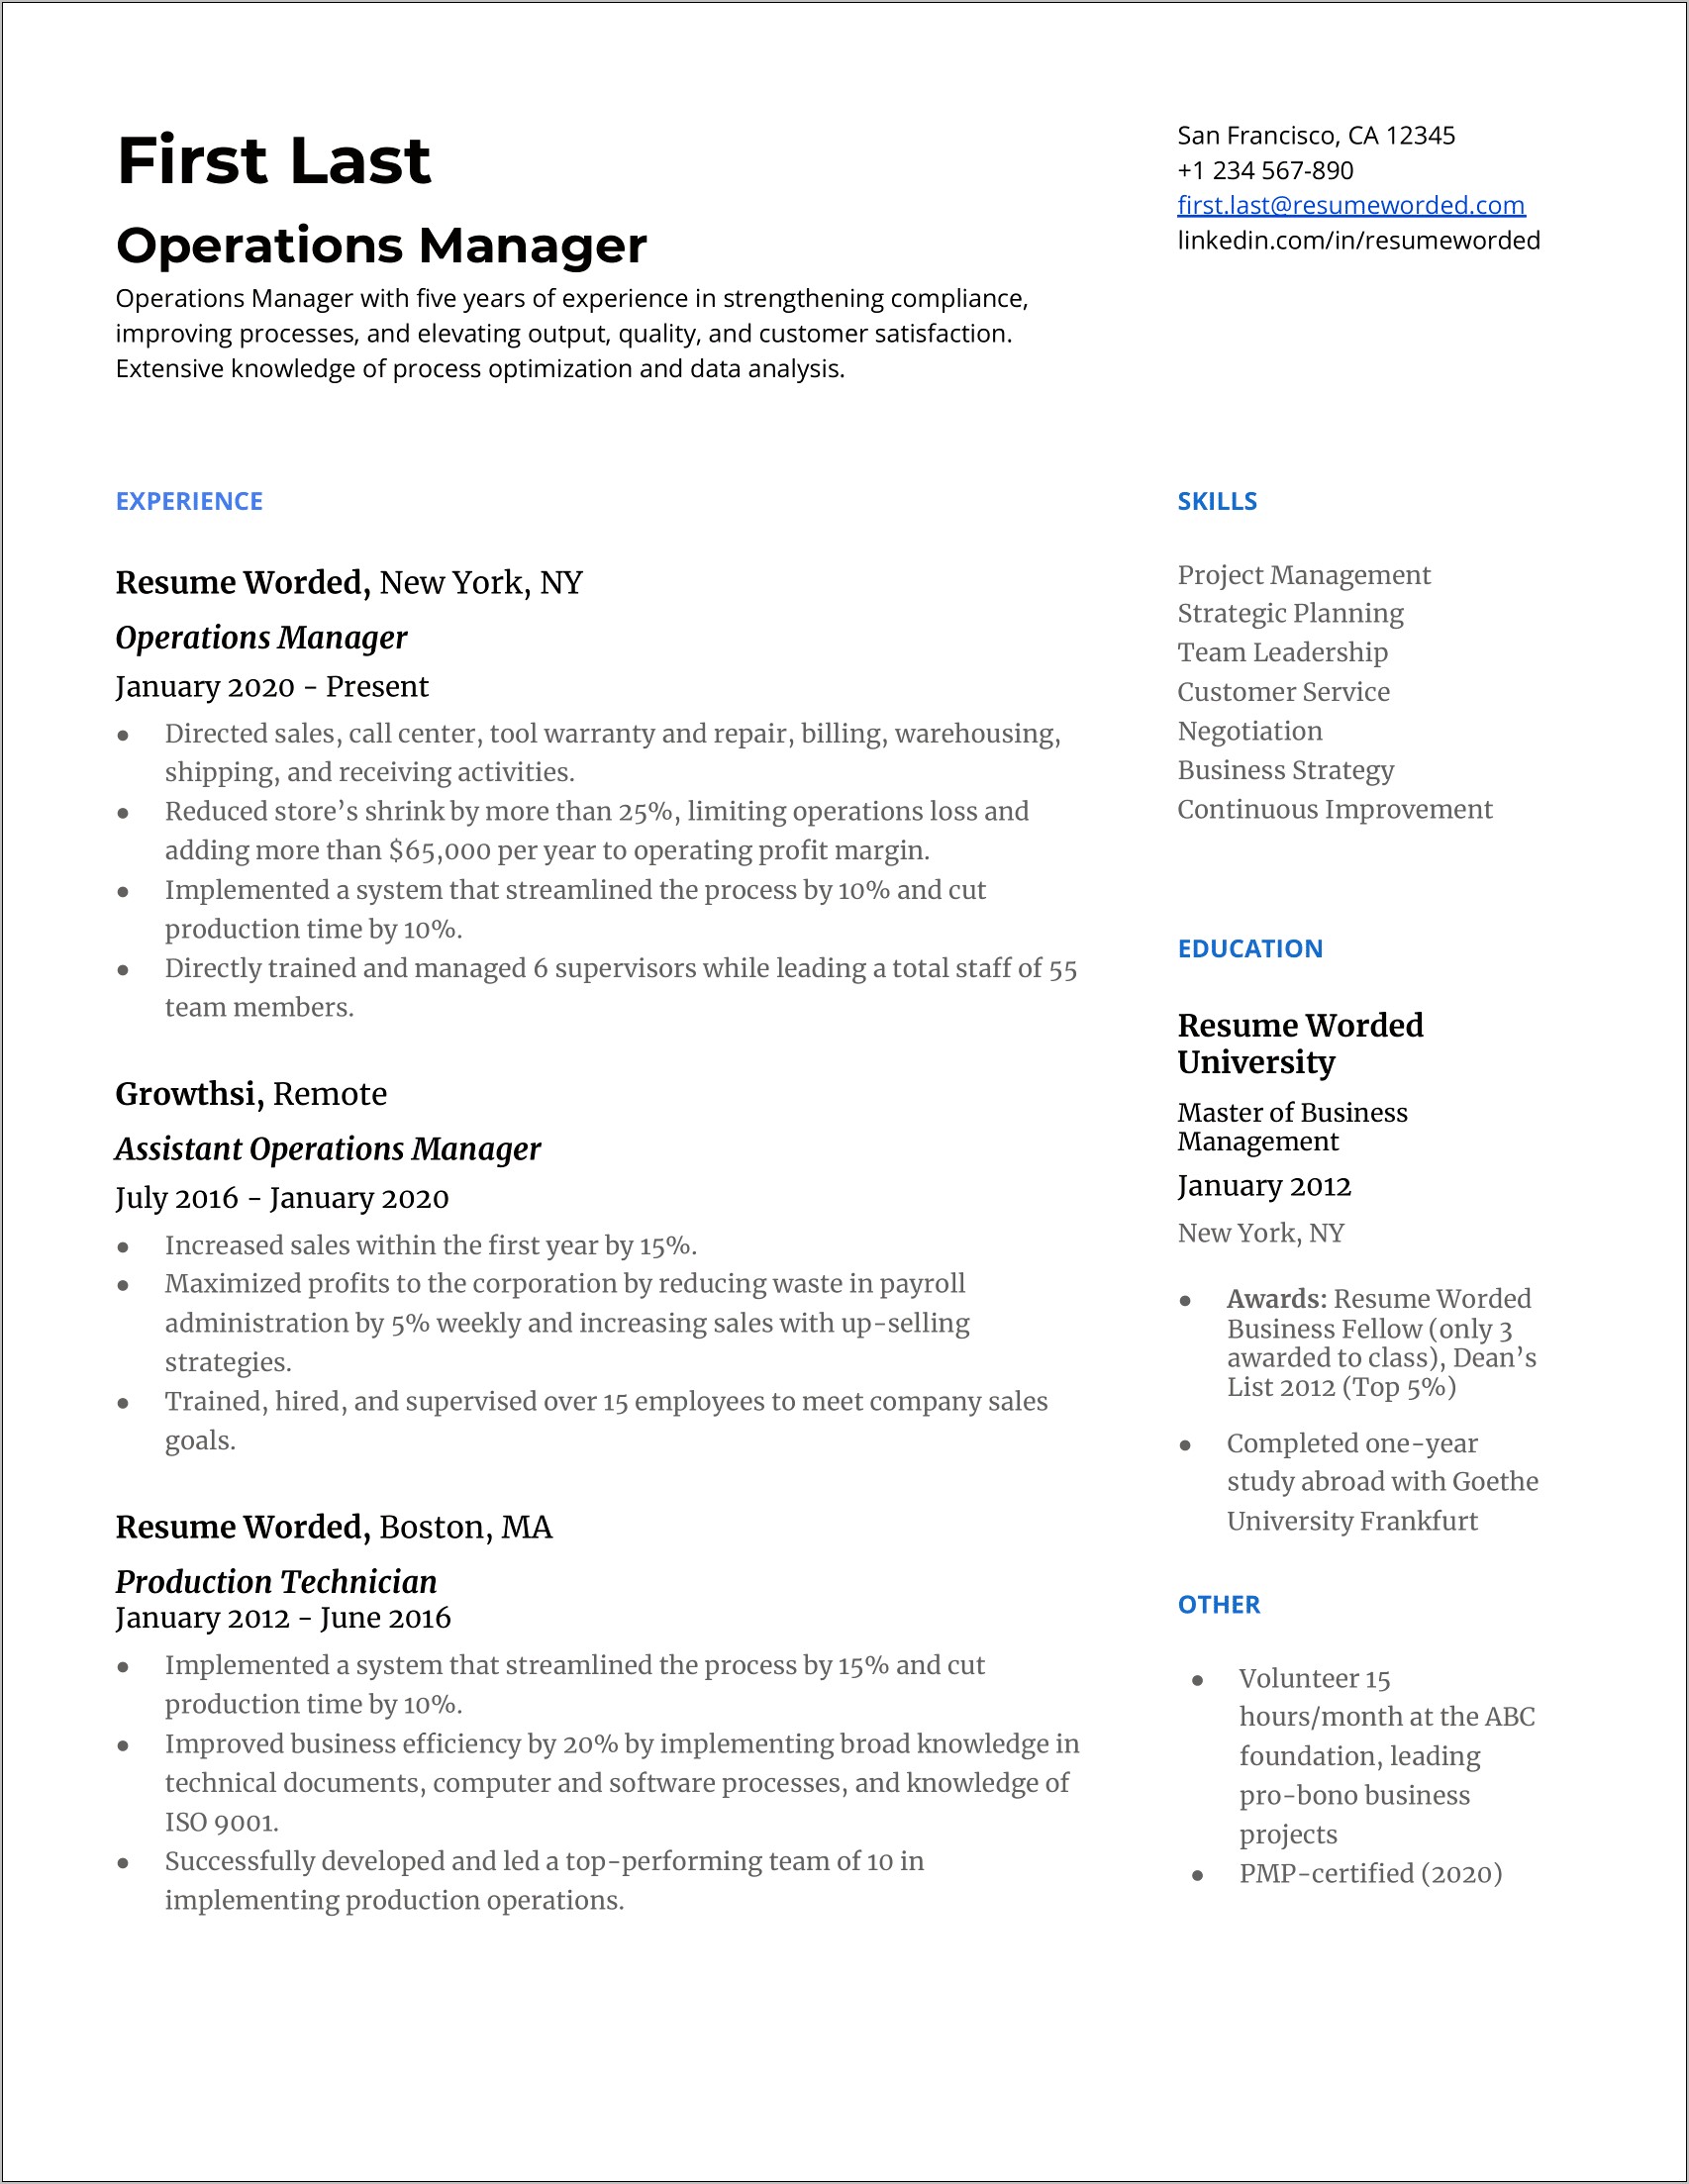 Resume Resume Work History And Education Required